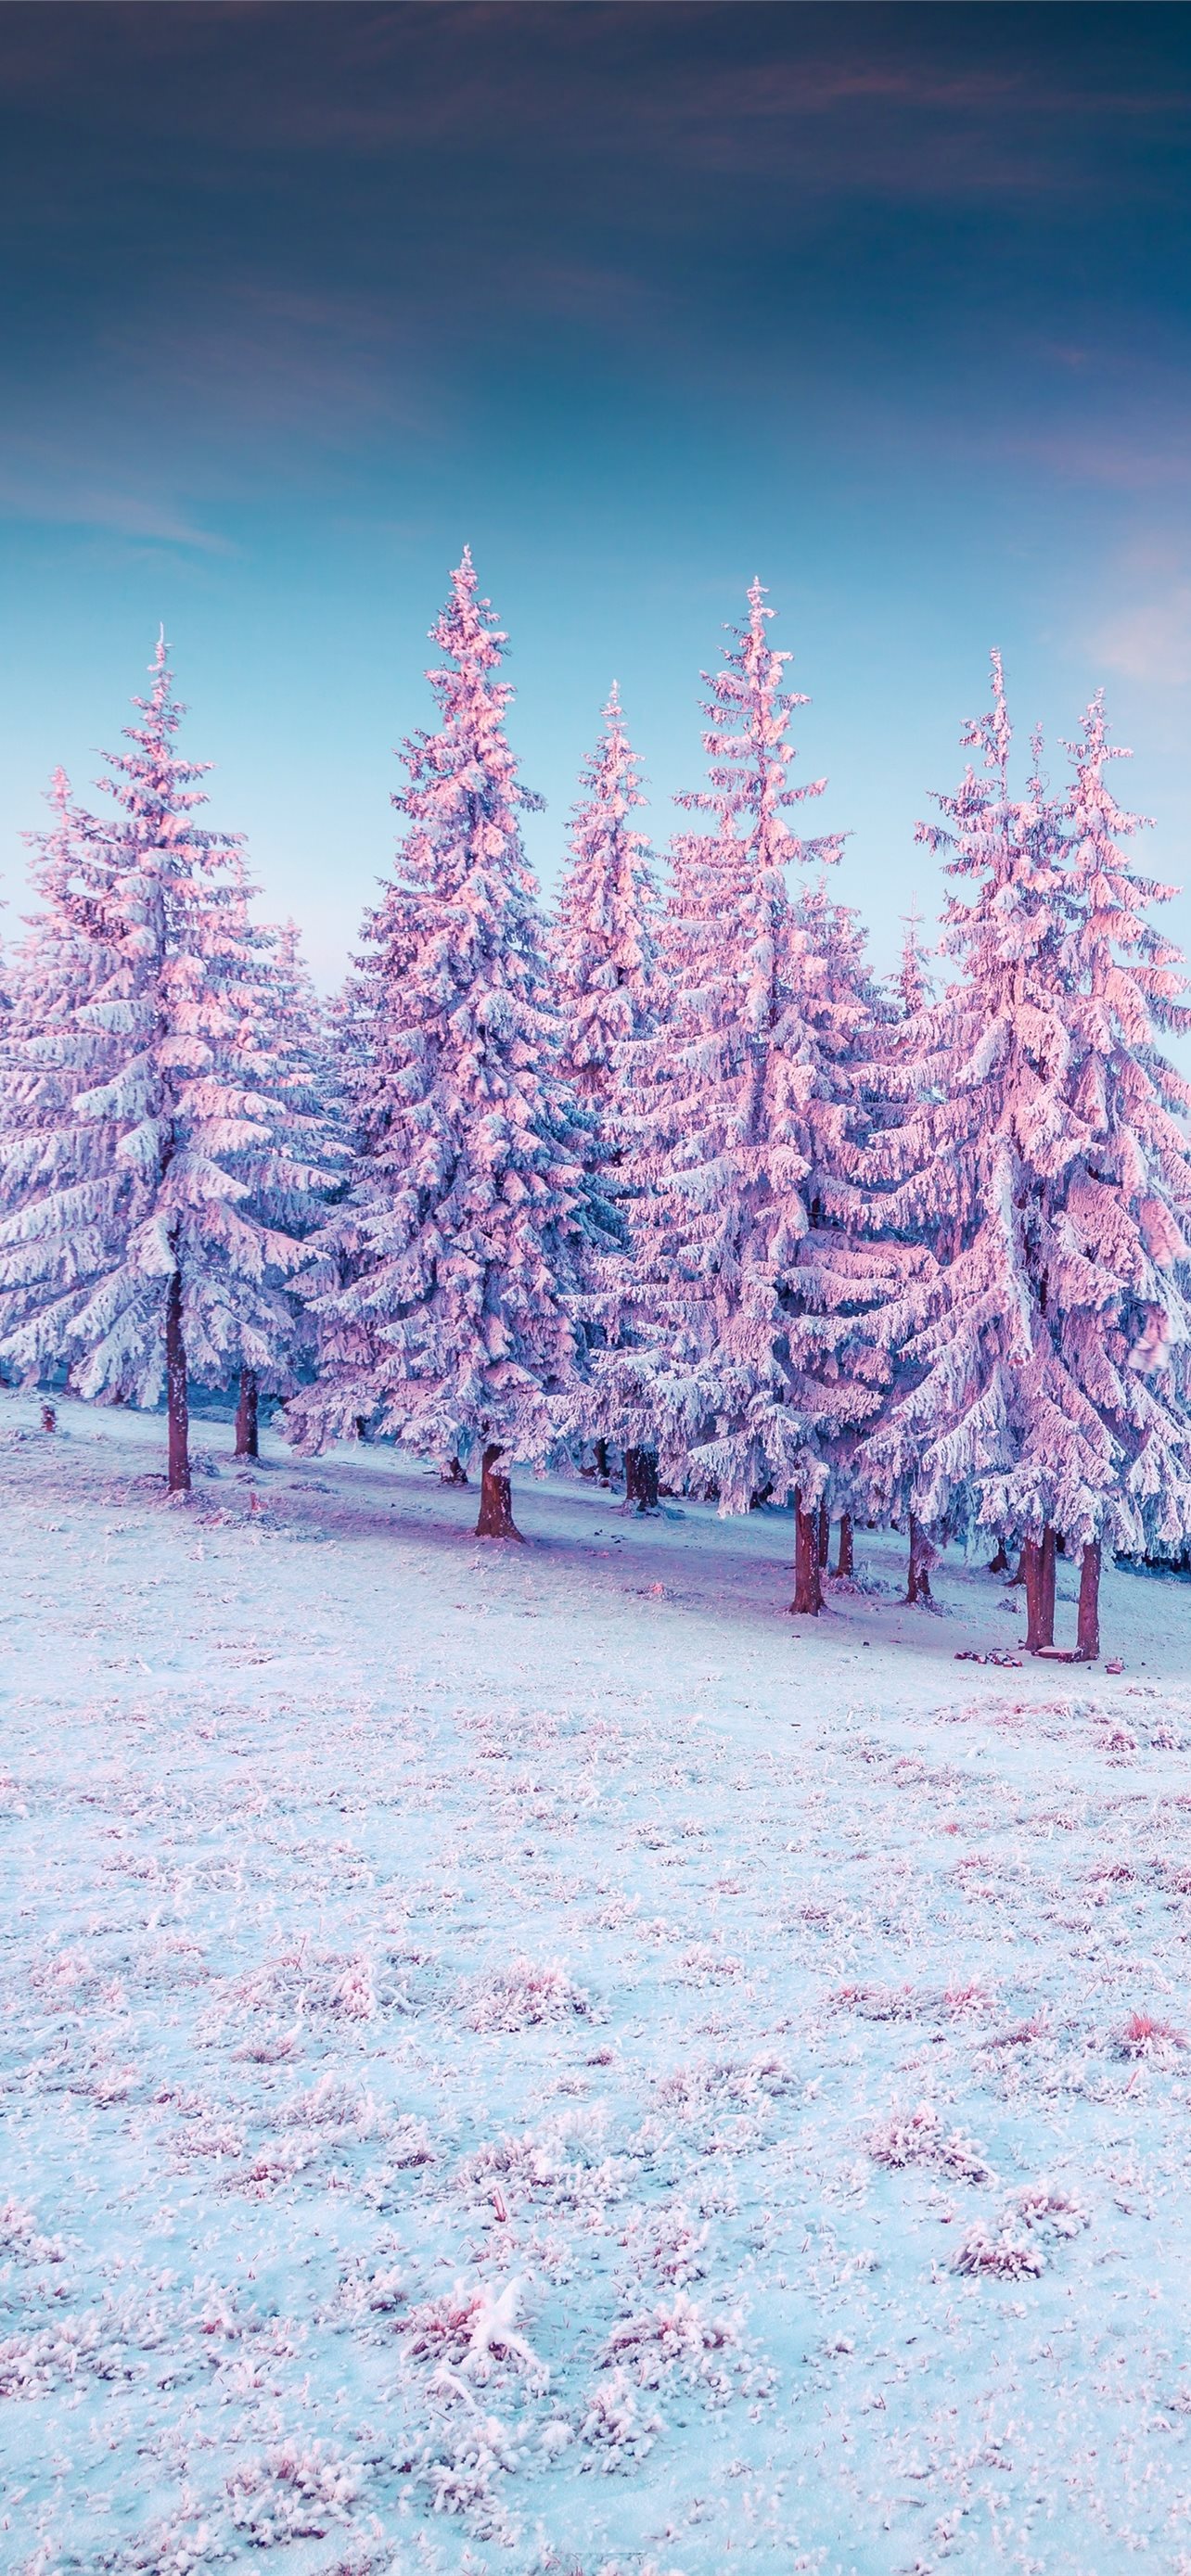 Nature Winter Through Pink Woods iPhone 6 Wallpaper Download  iPhone  Wallpapers iPad wallpapers Onest  Iphone wallpaper winter Winter  wallpaper Winter iphone